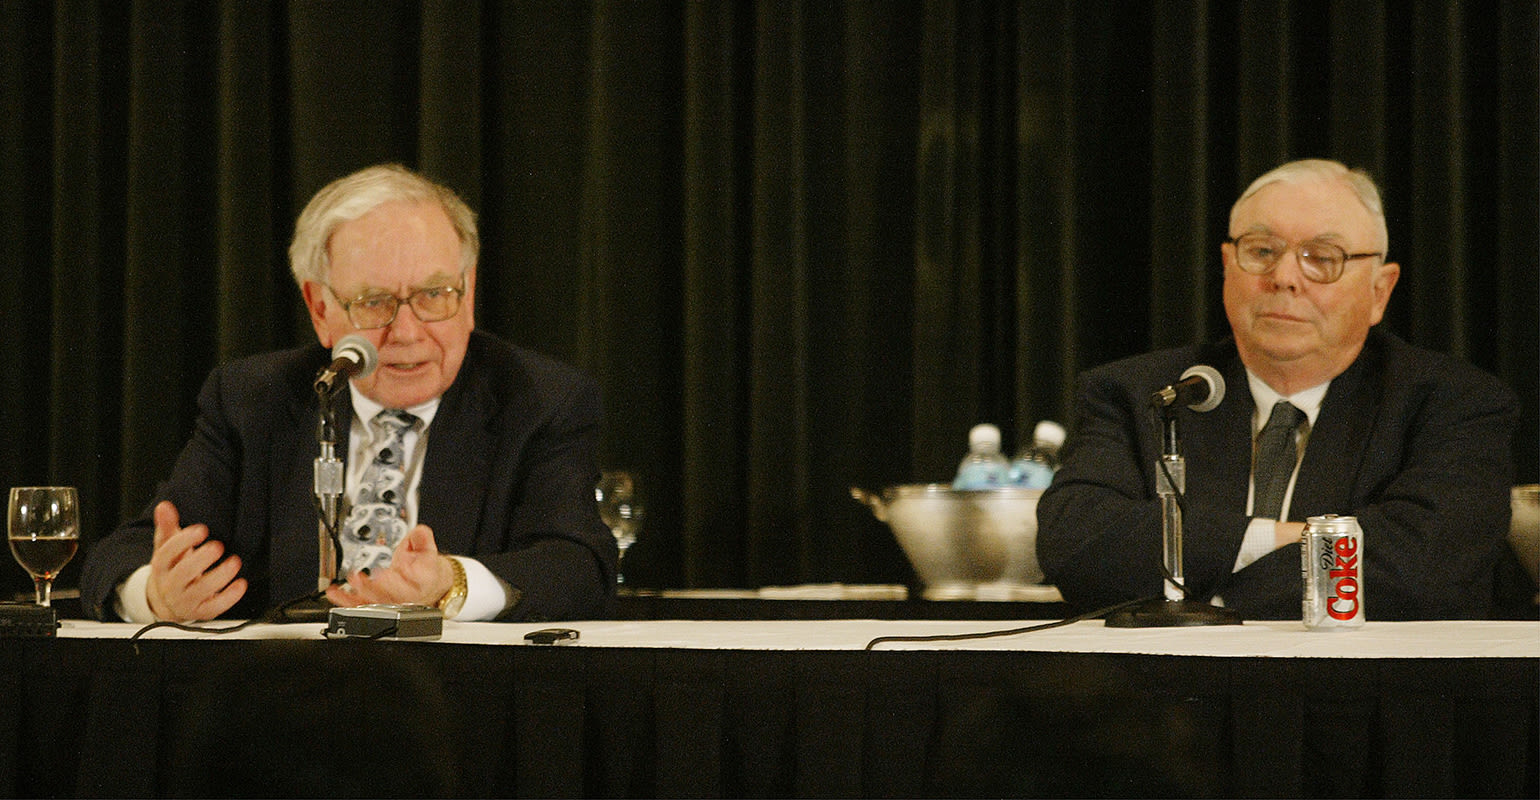 Mastering Succession: Insights from Berkshire Hathaway's Playbook